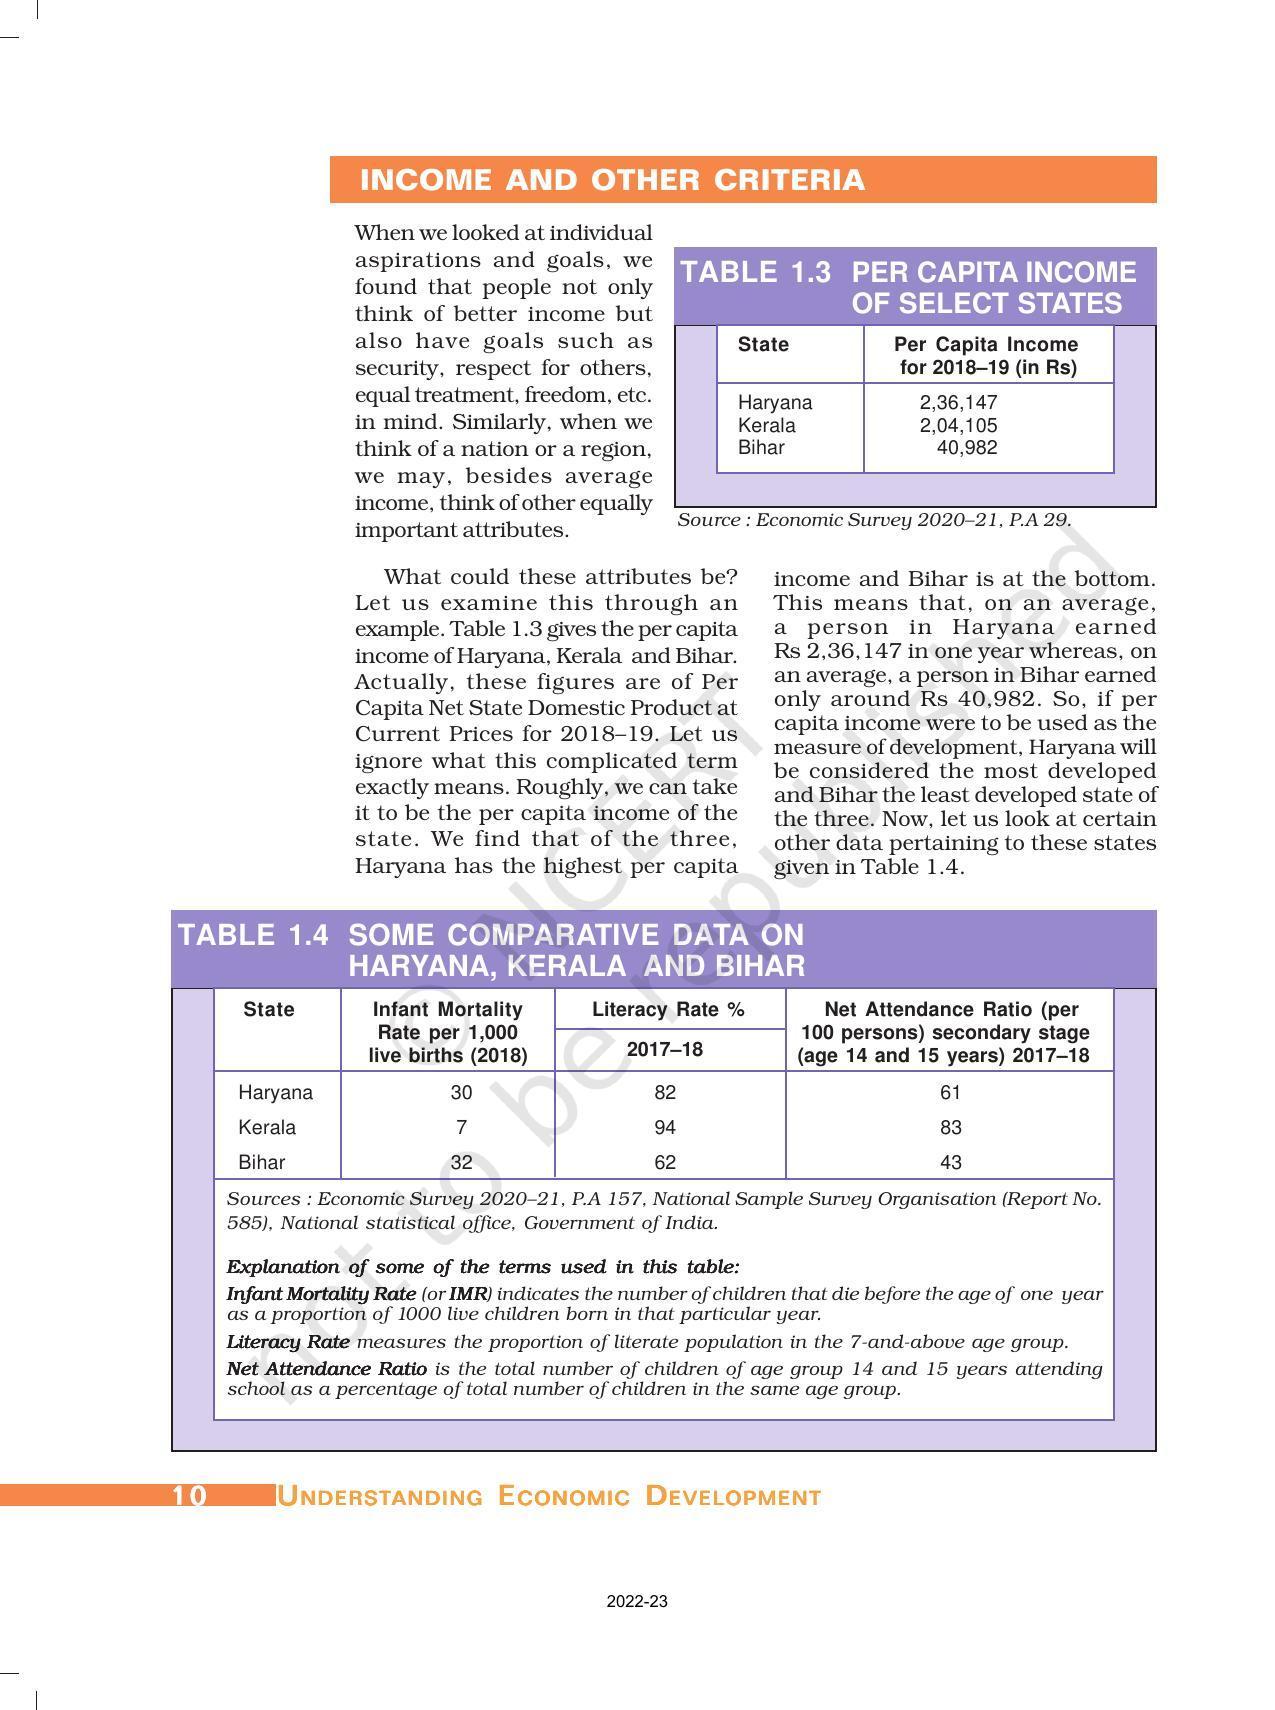 NCERT Book for Class 10 Economics Chapter 1 Development - Page 9